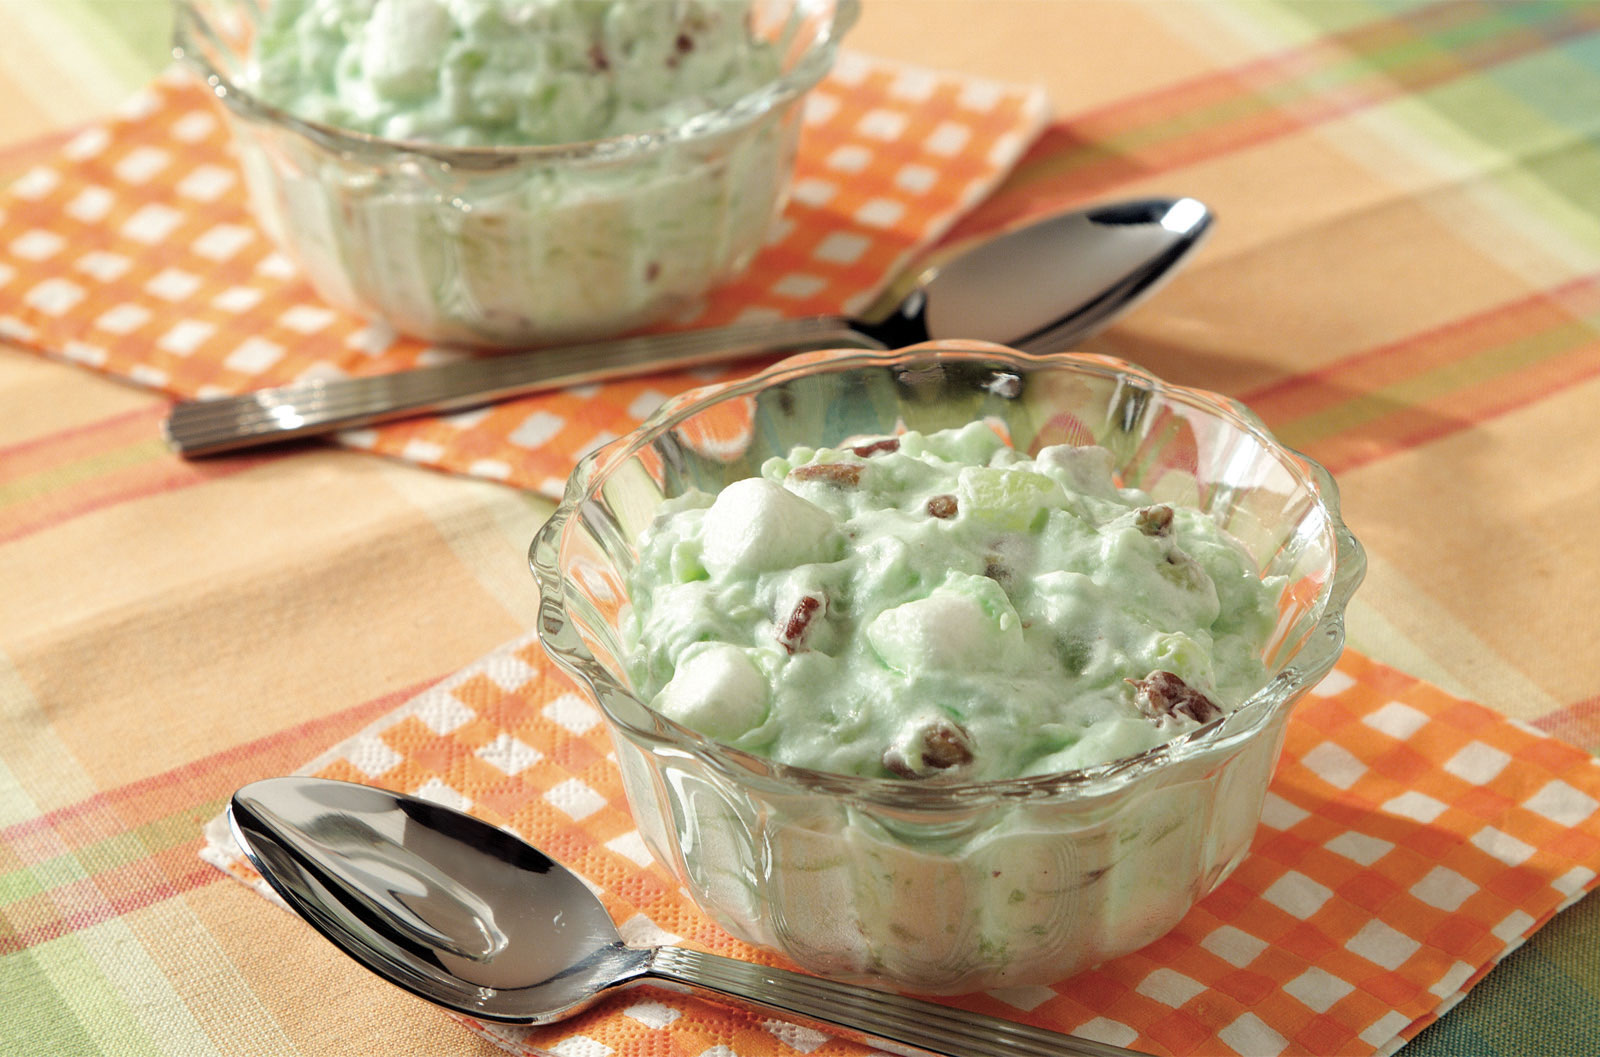 What Cake Matches Your Vibe? Watergate salad